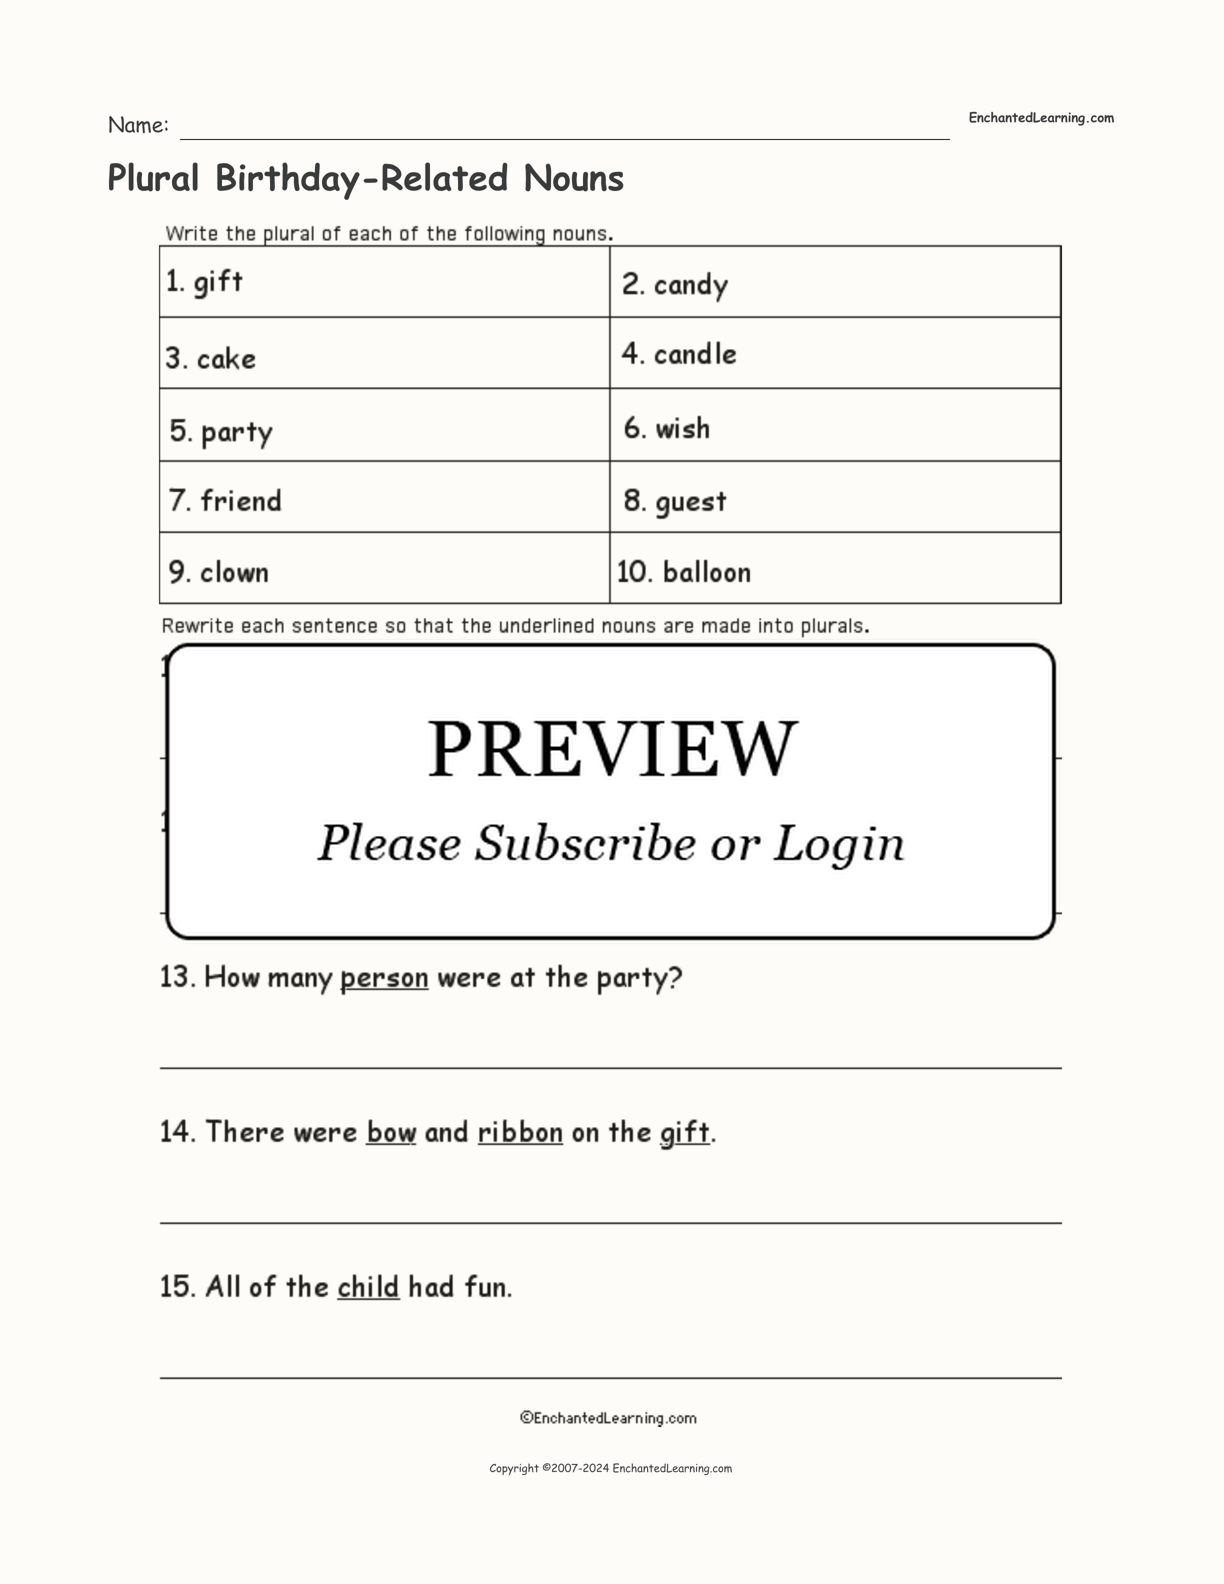 Plural Birthday-Related Nouns interactive worksheet page 1